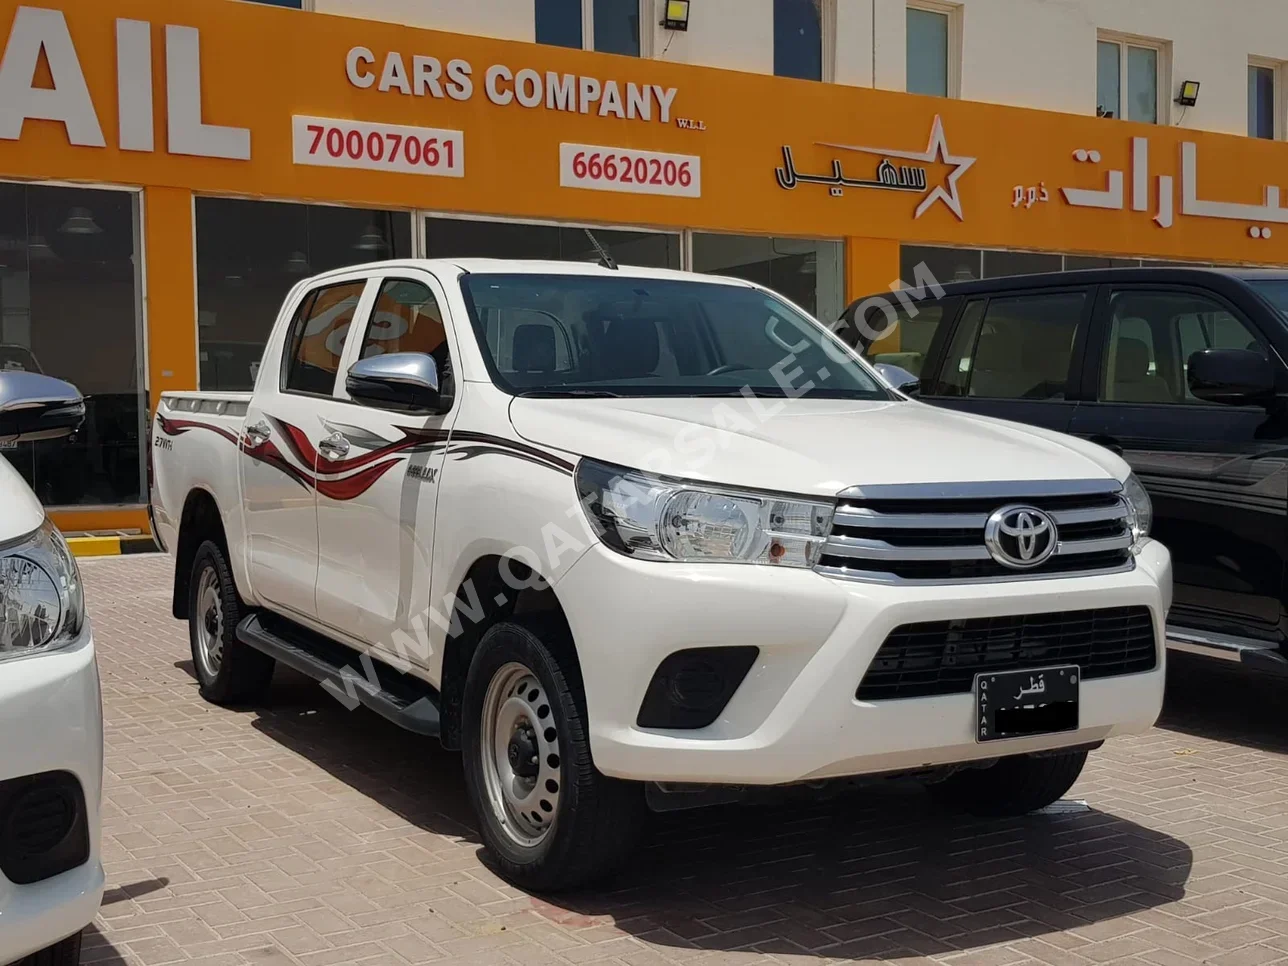 Toyota  Hilux  2020  Automatic  68,000 Km  4 Cylinder  Four Wheel Drive (4WD)  Pick Up  White